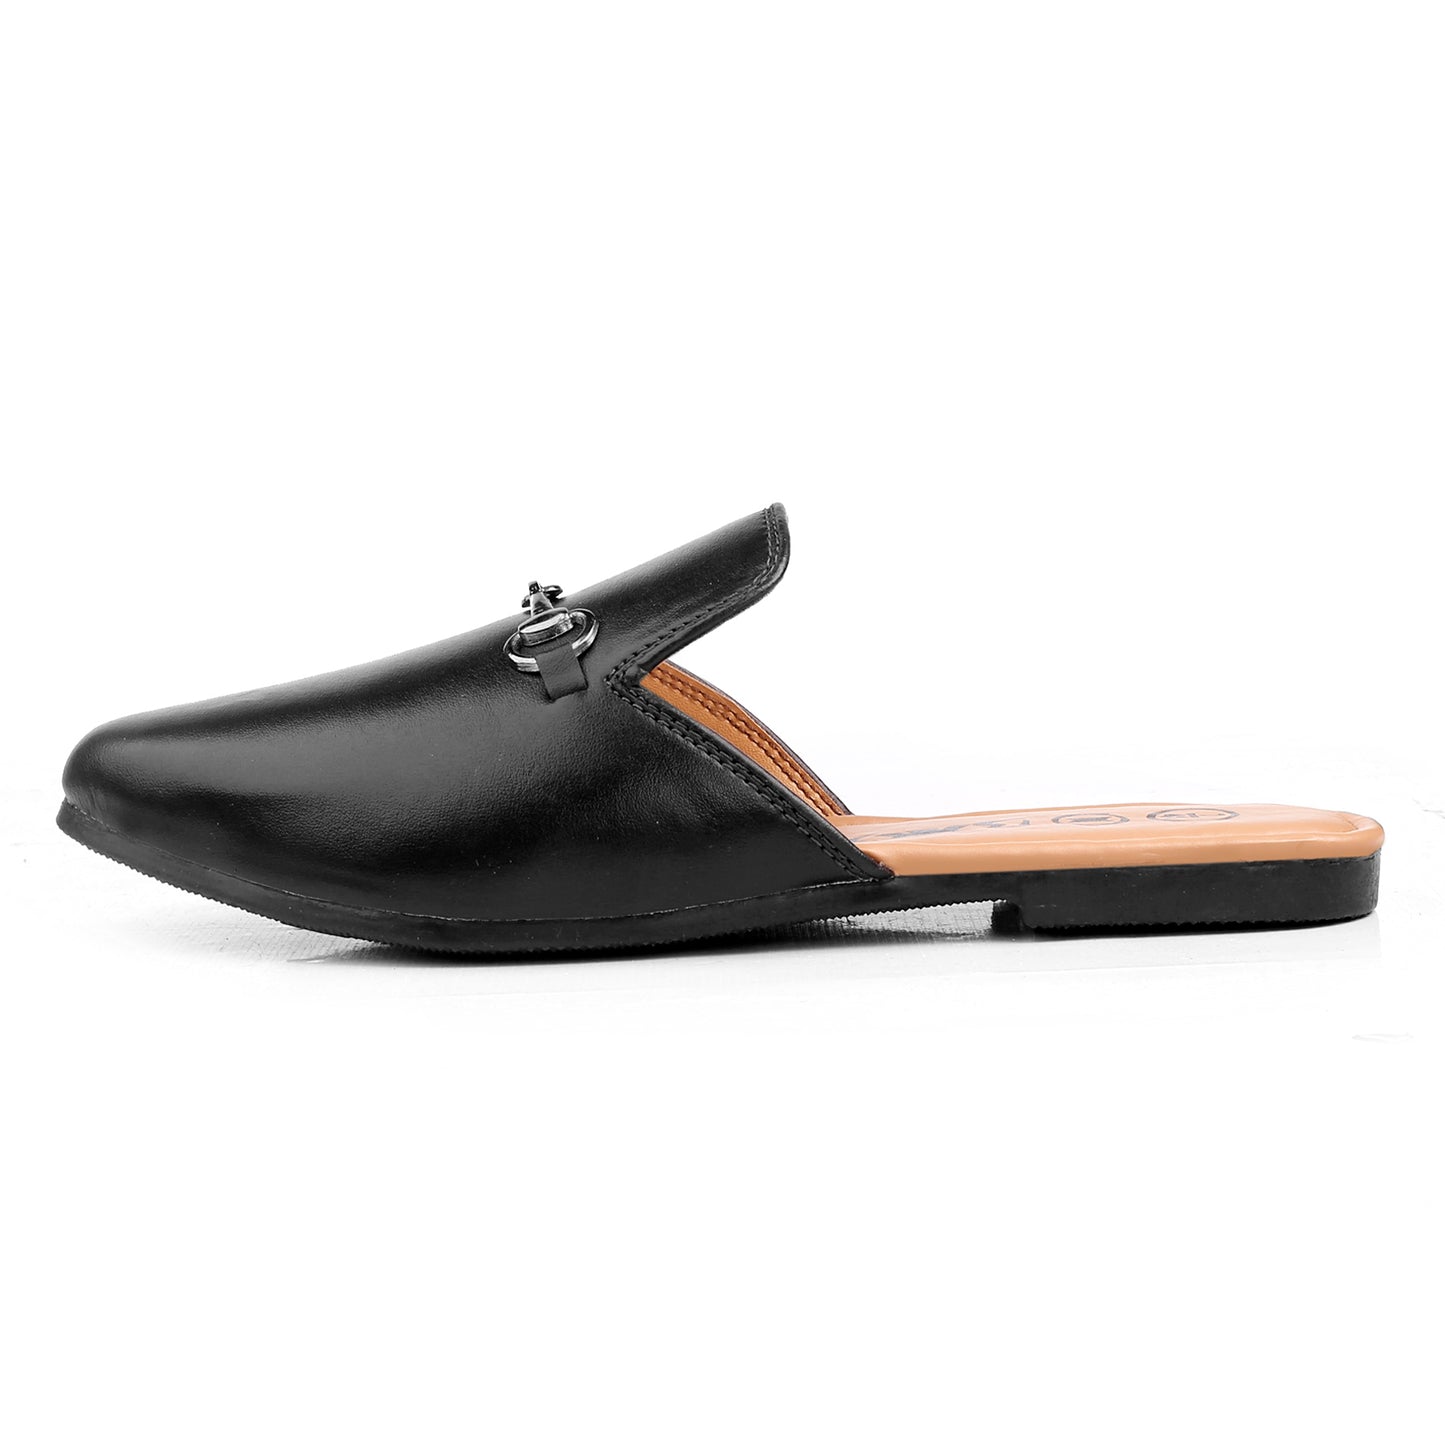 Bxxy Men's Vegan Leather Material Latest Stylish Mules